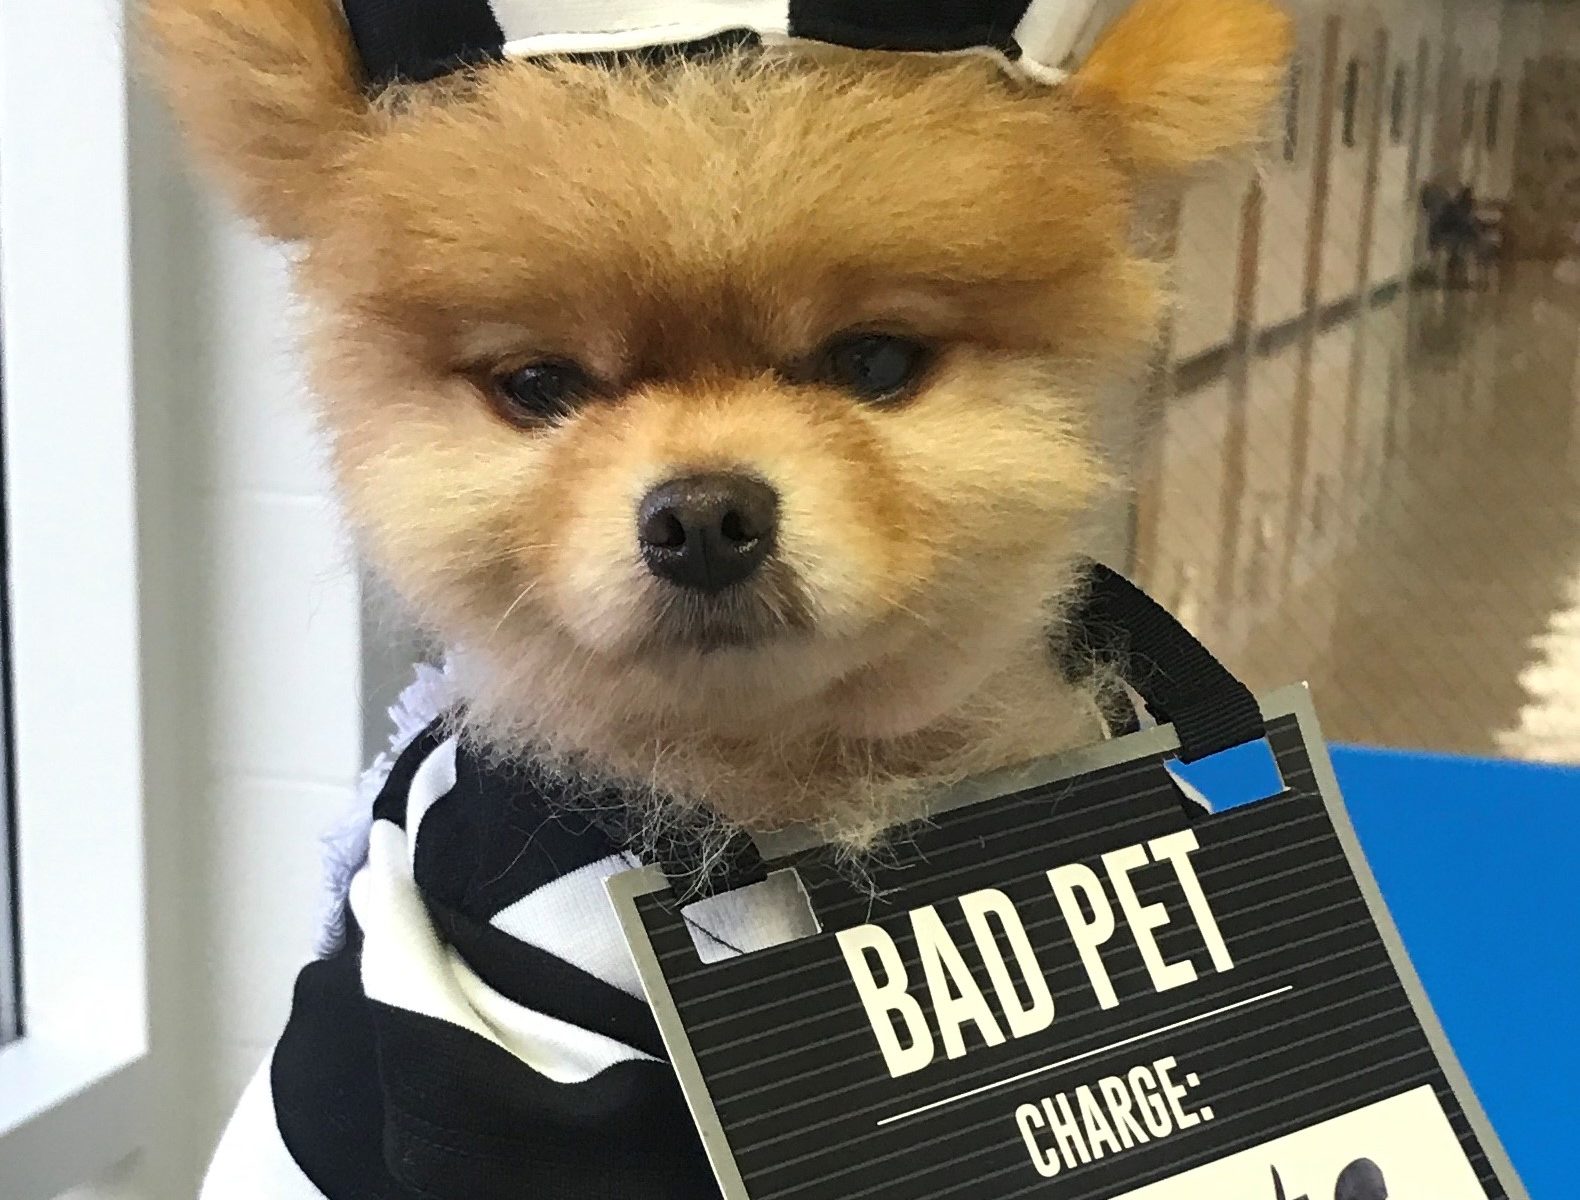 Notty, a yellow dog dressed as a prison inmate